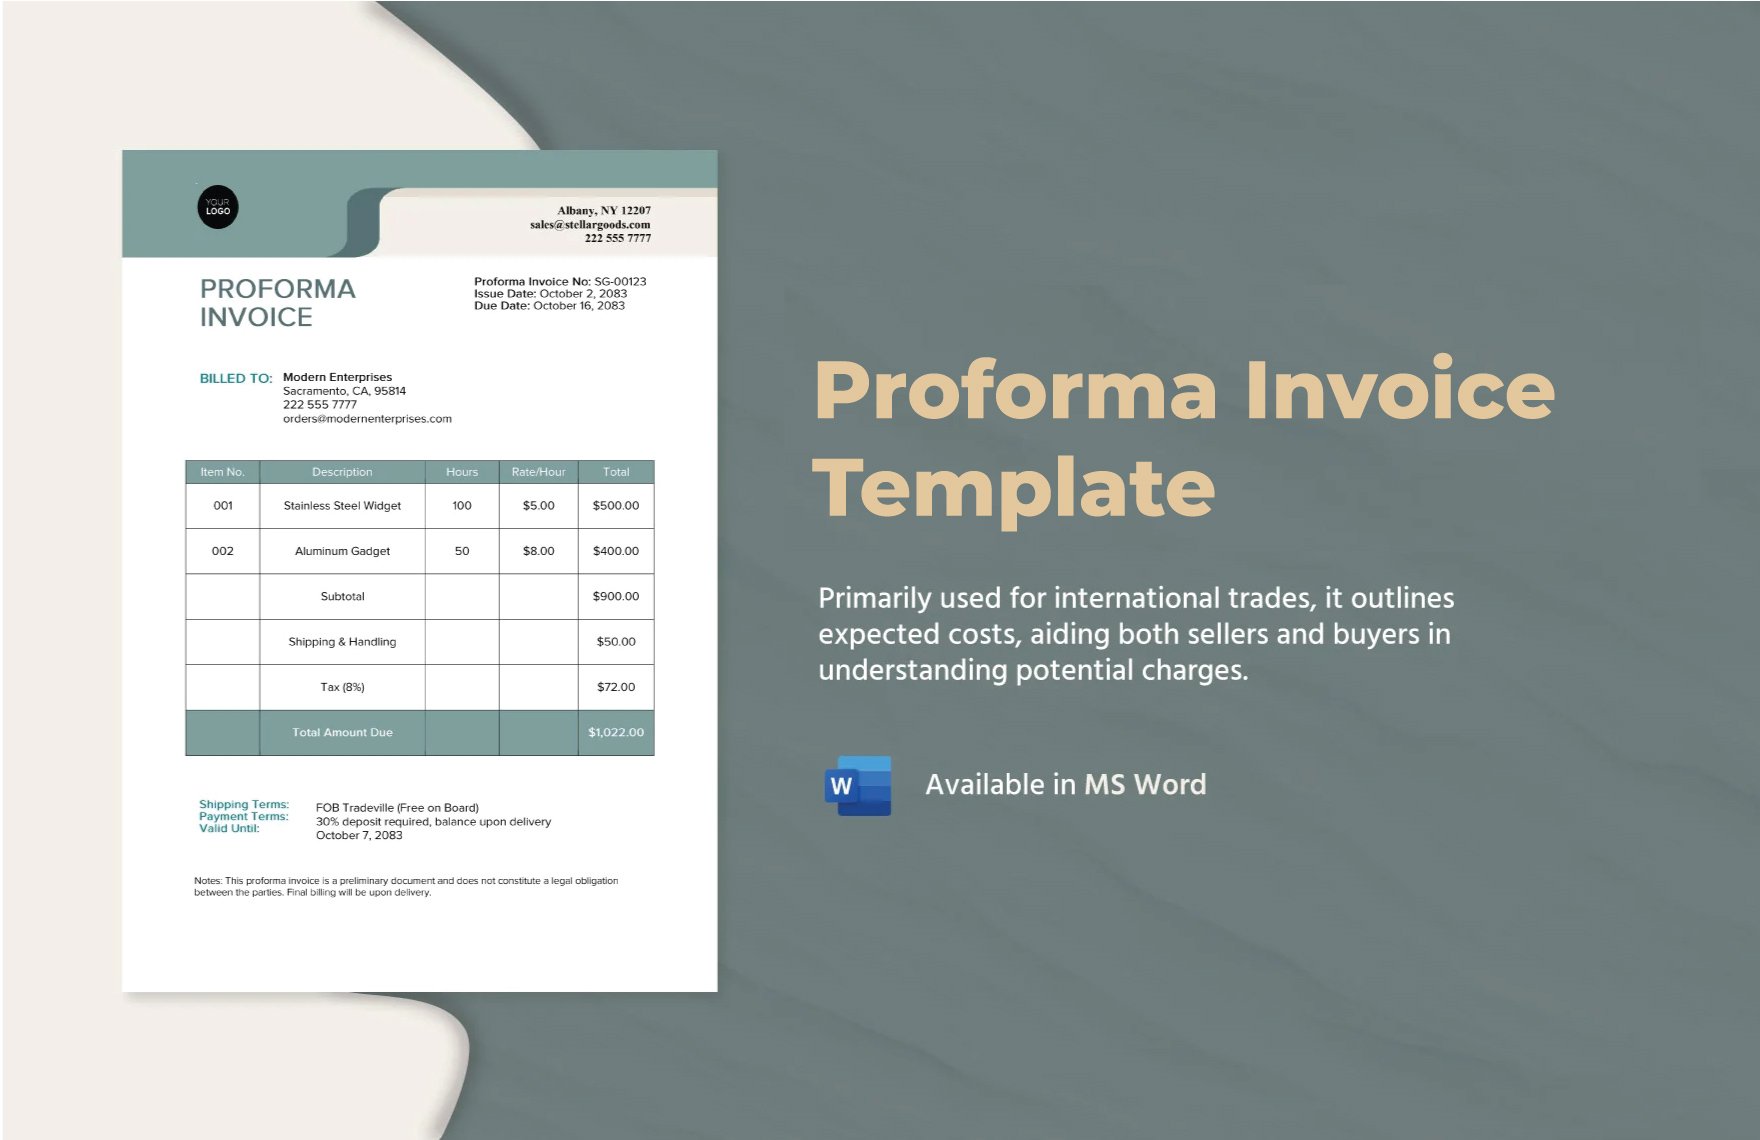 Proforma Invoice Template in Word